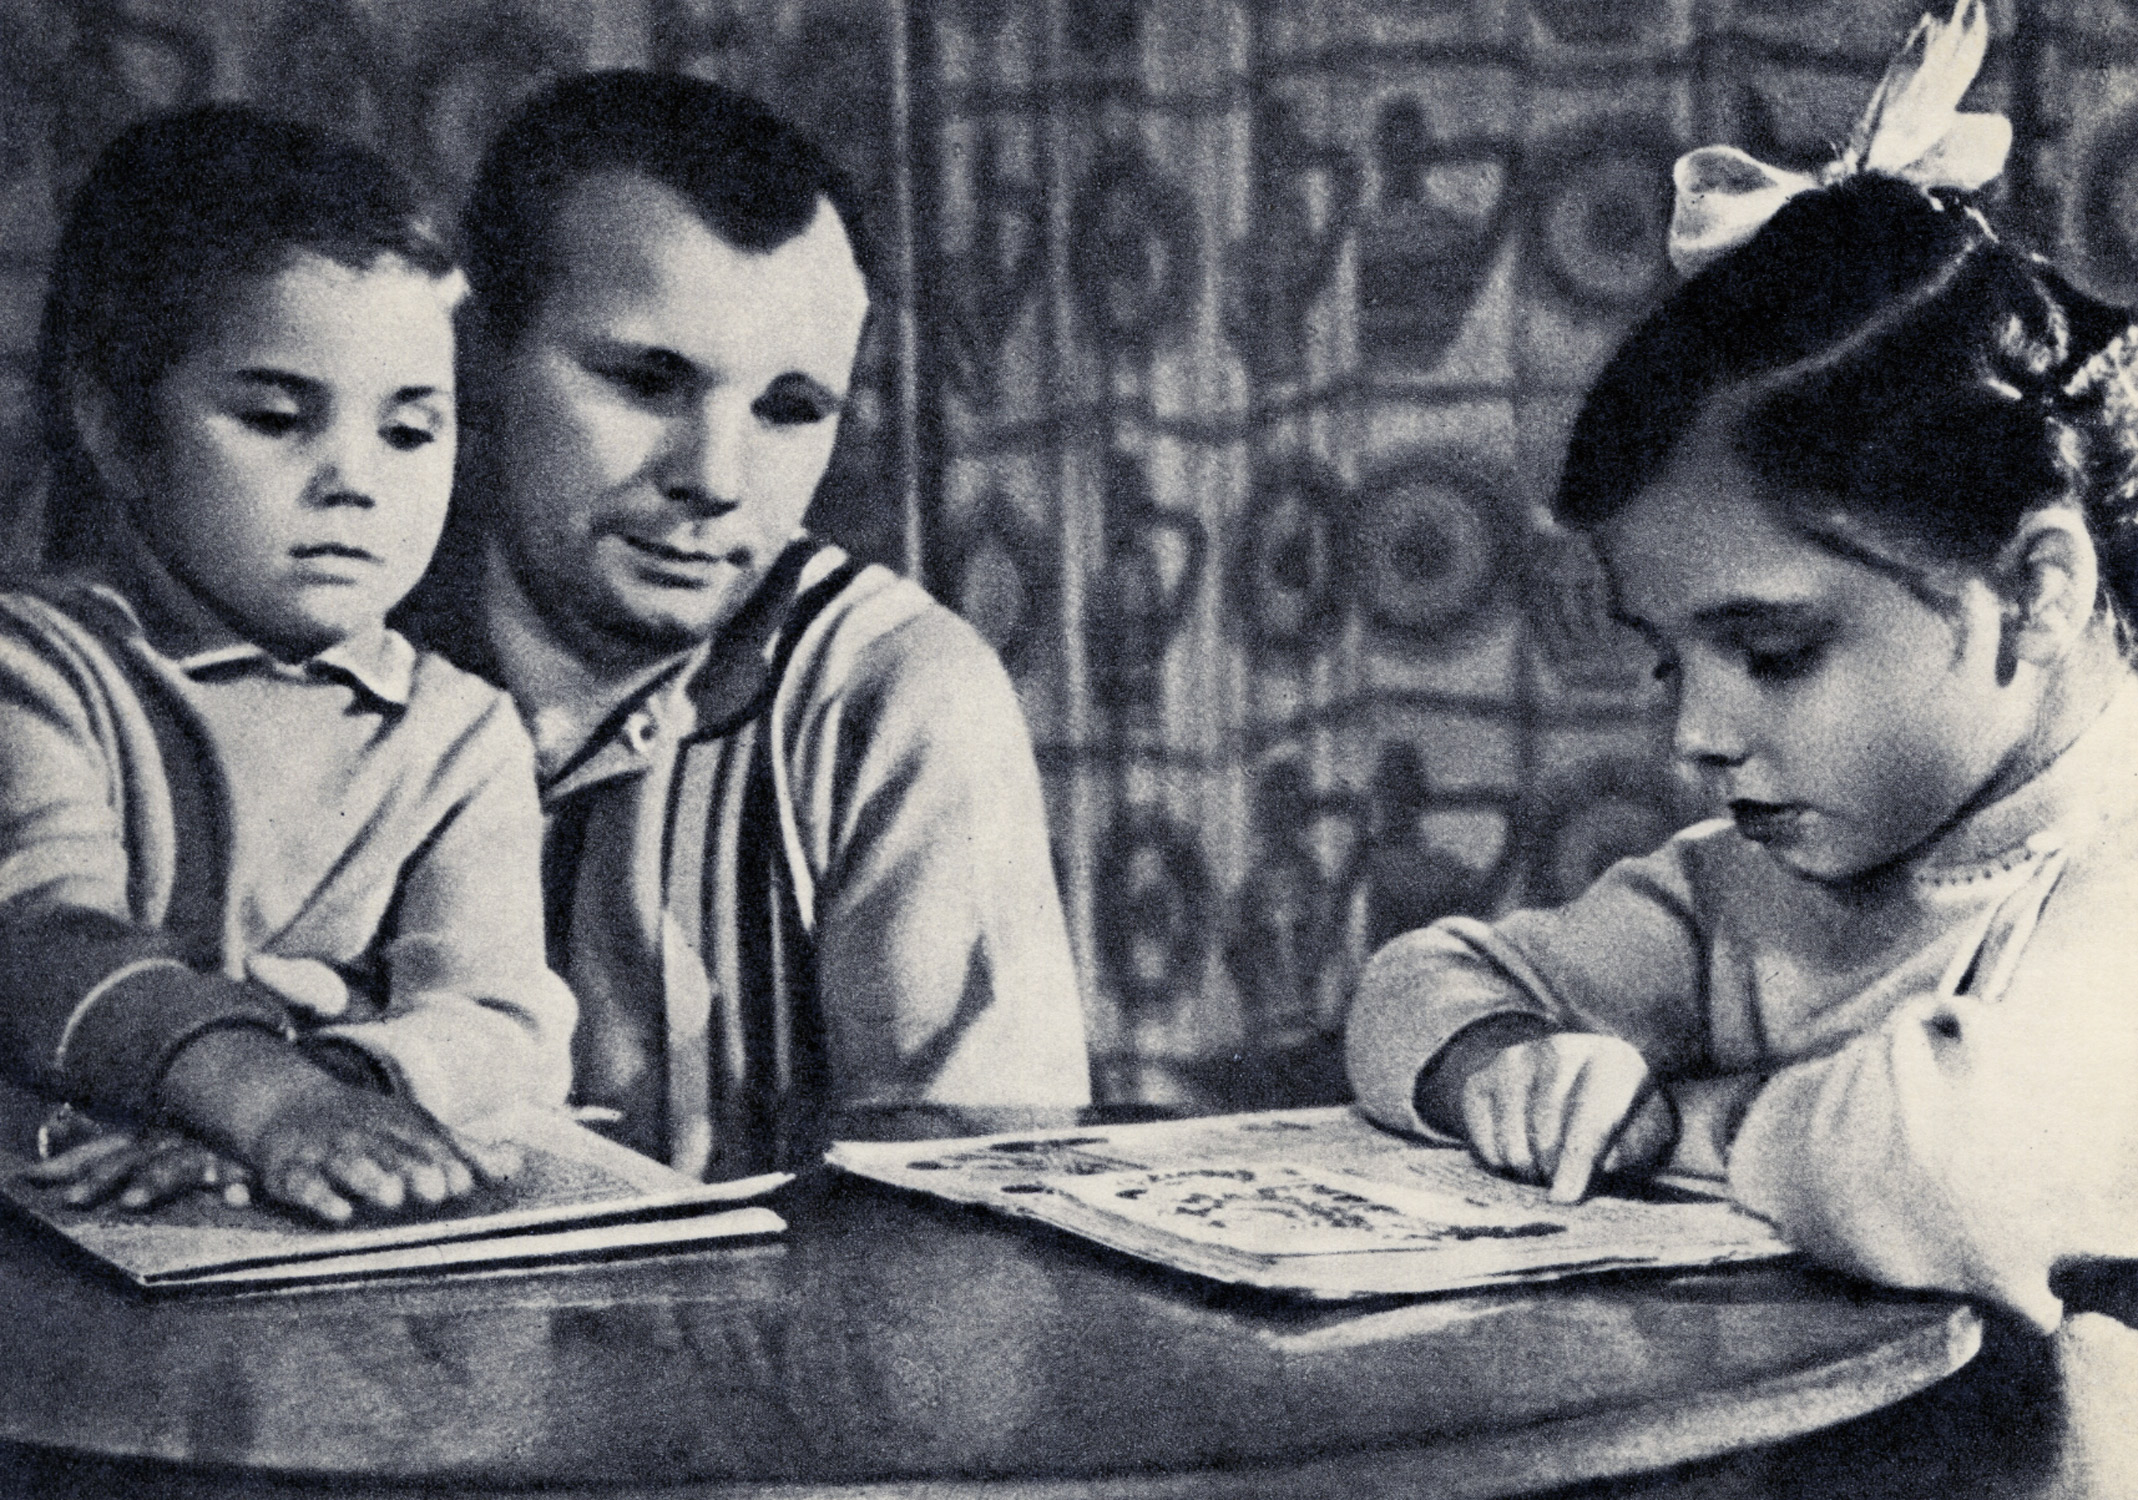 Family Man: Gagarin is pictured with his daughters Lena and Galya. The postcards in this gallery are drawn from an album assembled during Gagarin's lifetime by an unknown admirer.